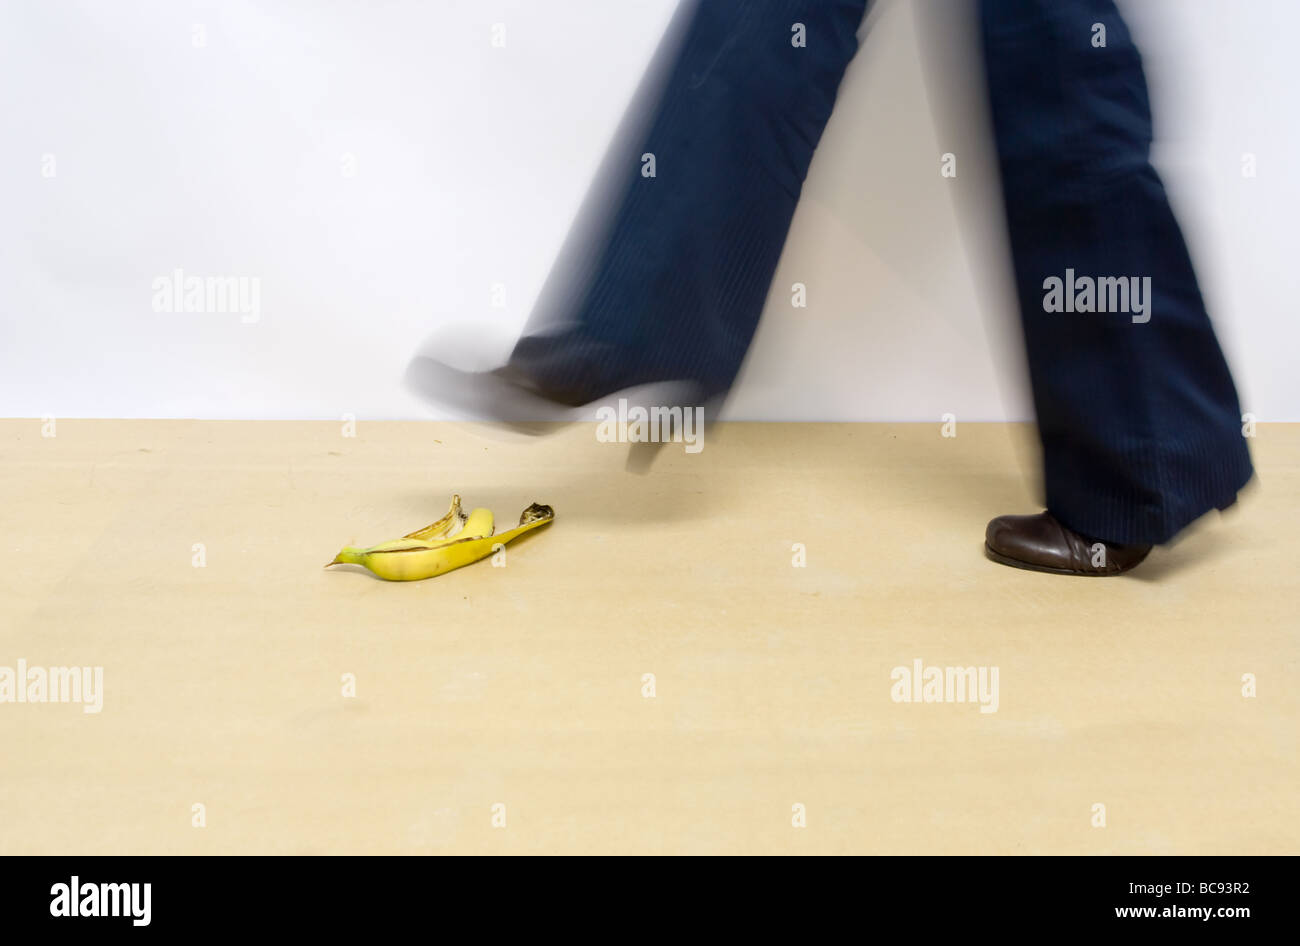 woman going to step on a bananapeel Stock Photo